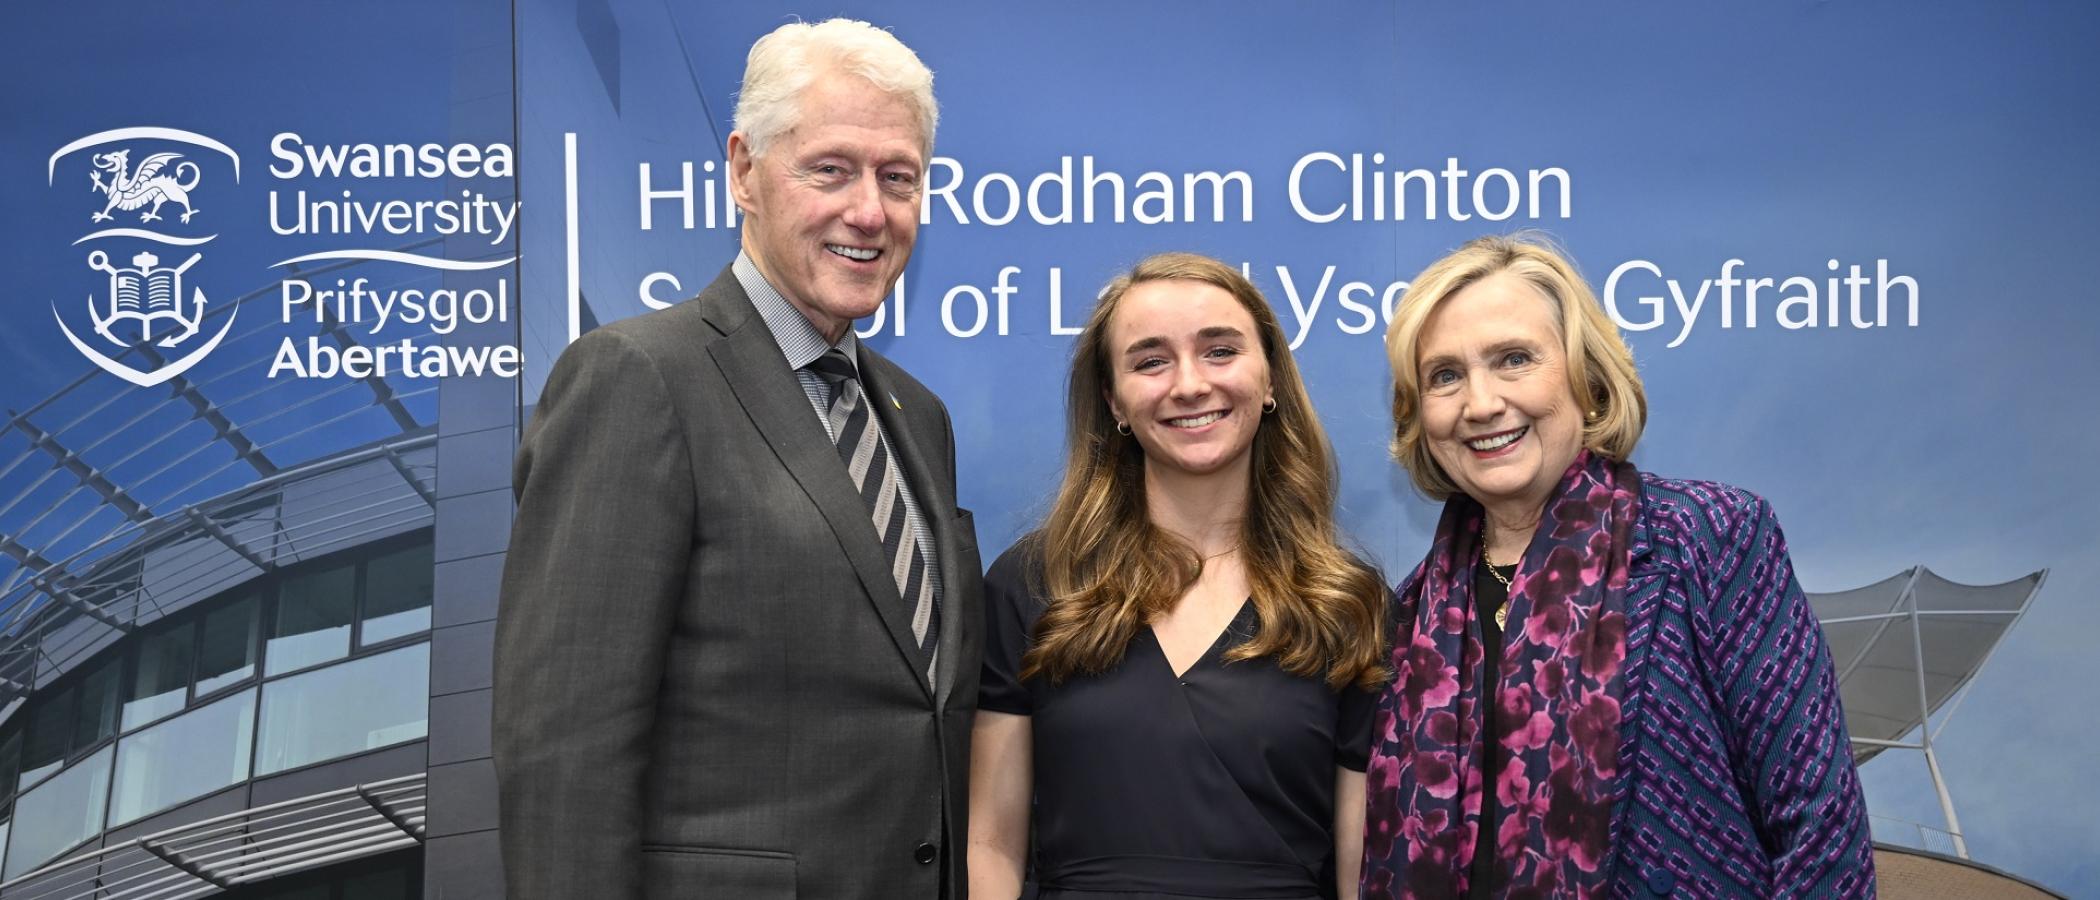 Clintons’ visit to Swansea University puts focus on leadership for future generations